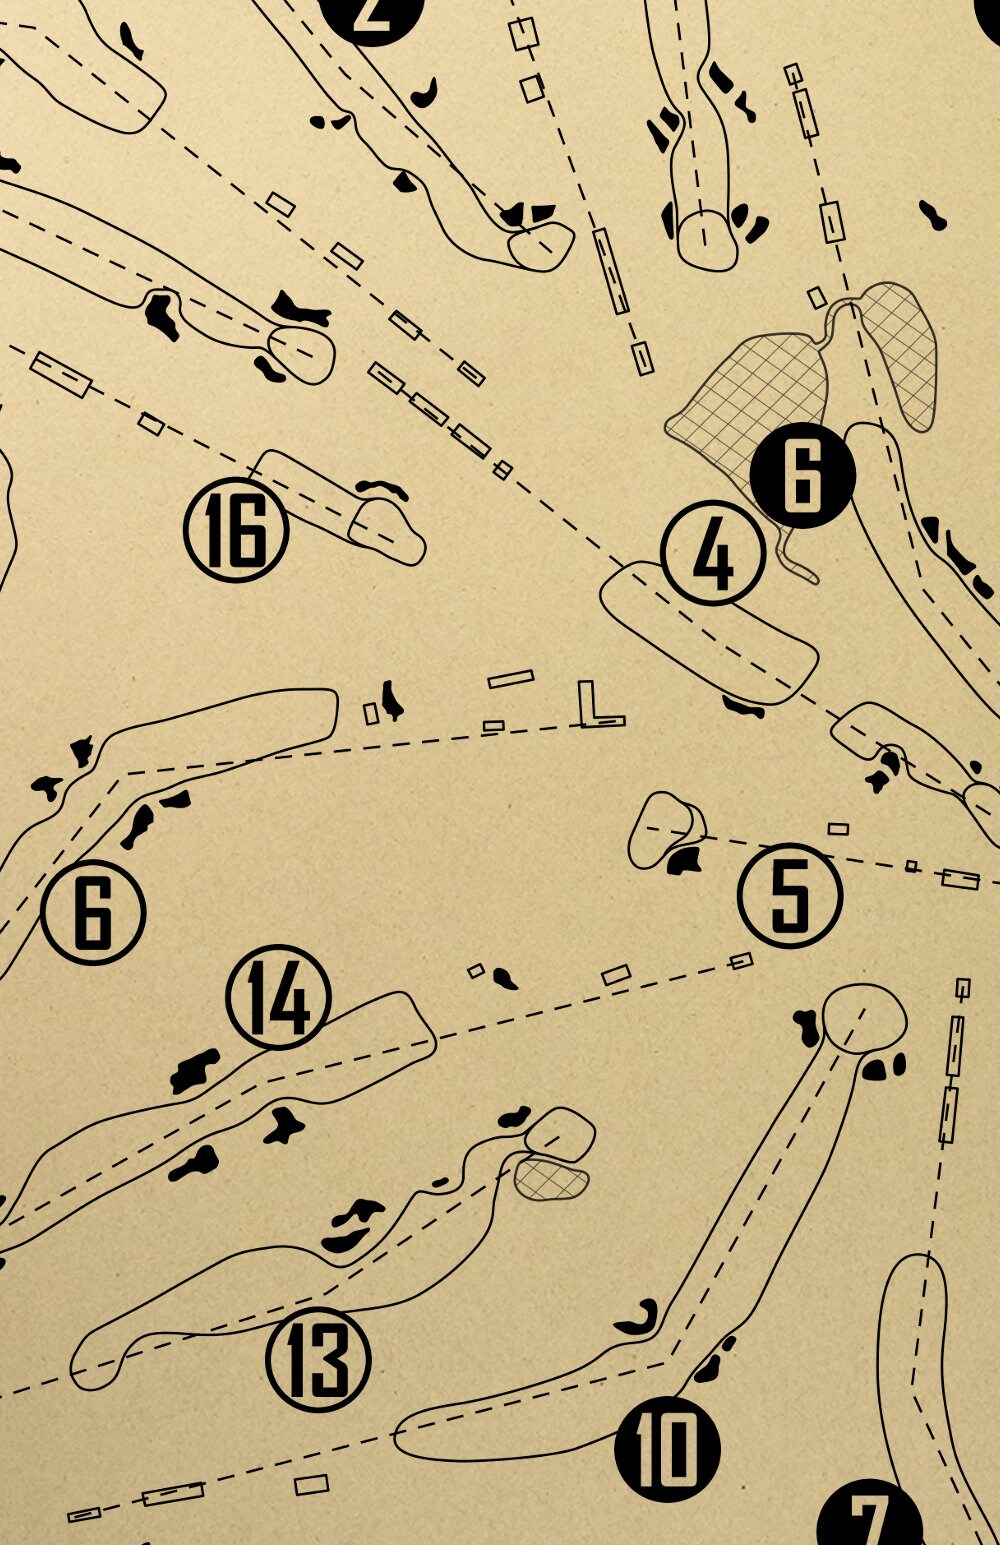 The Broadmoor East and West Courses Outline (Print)